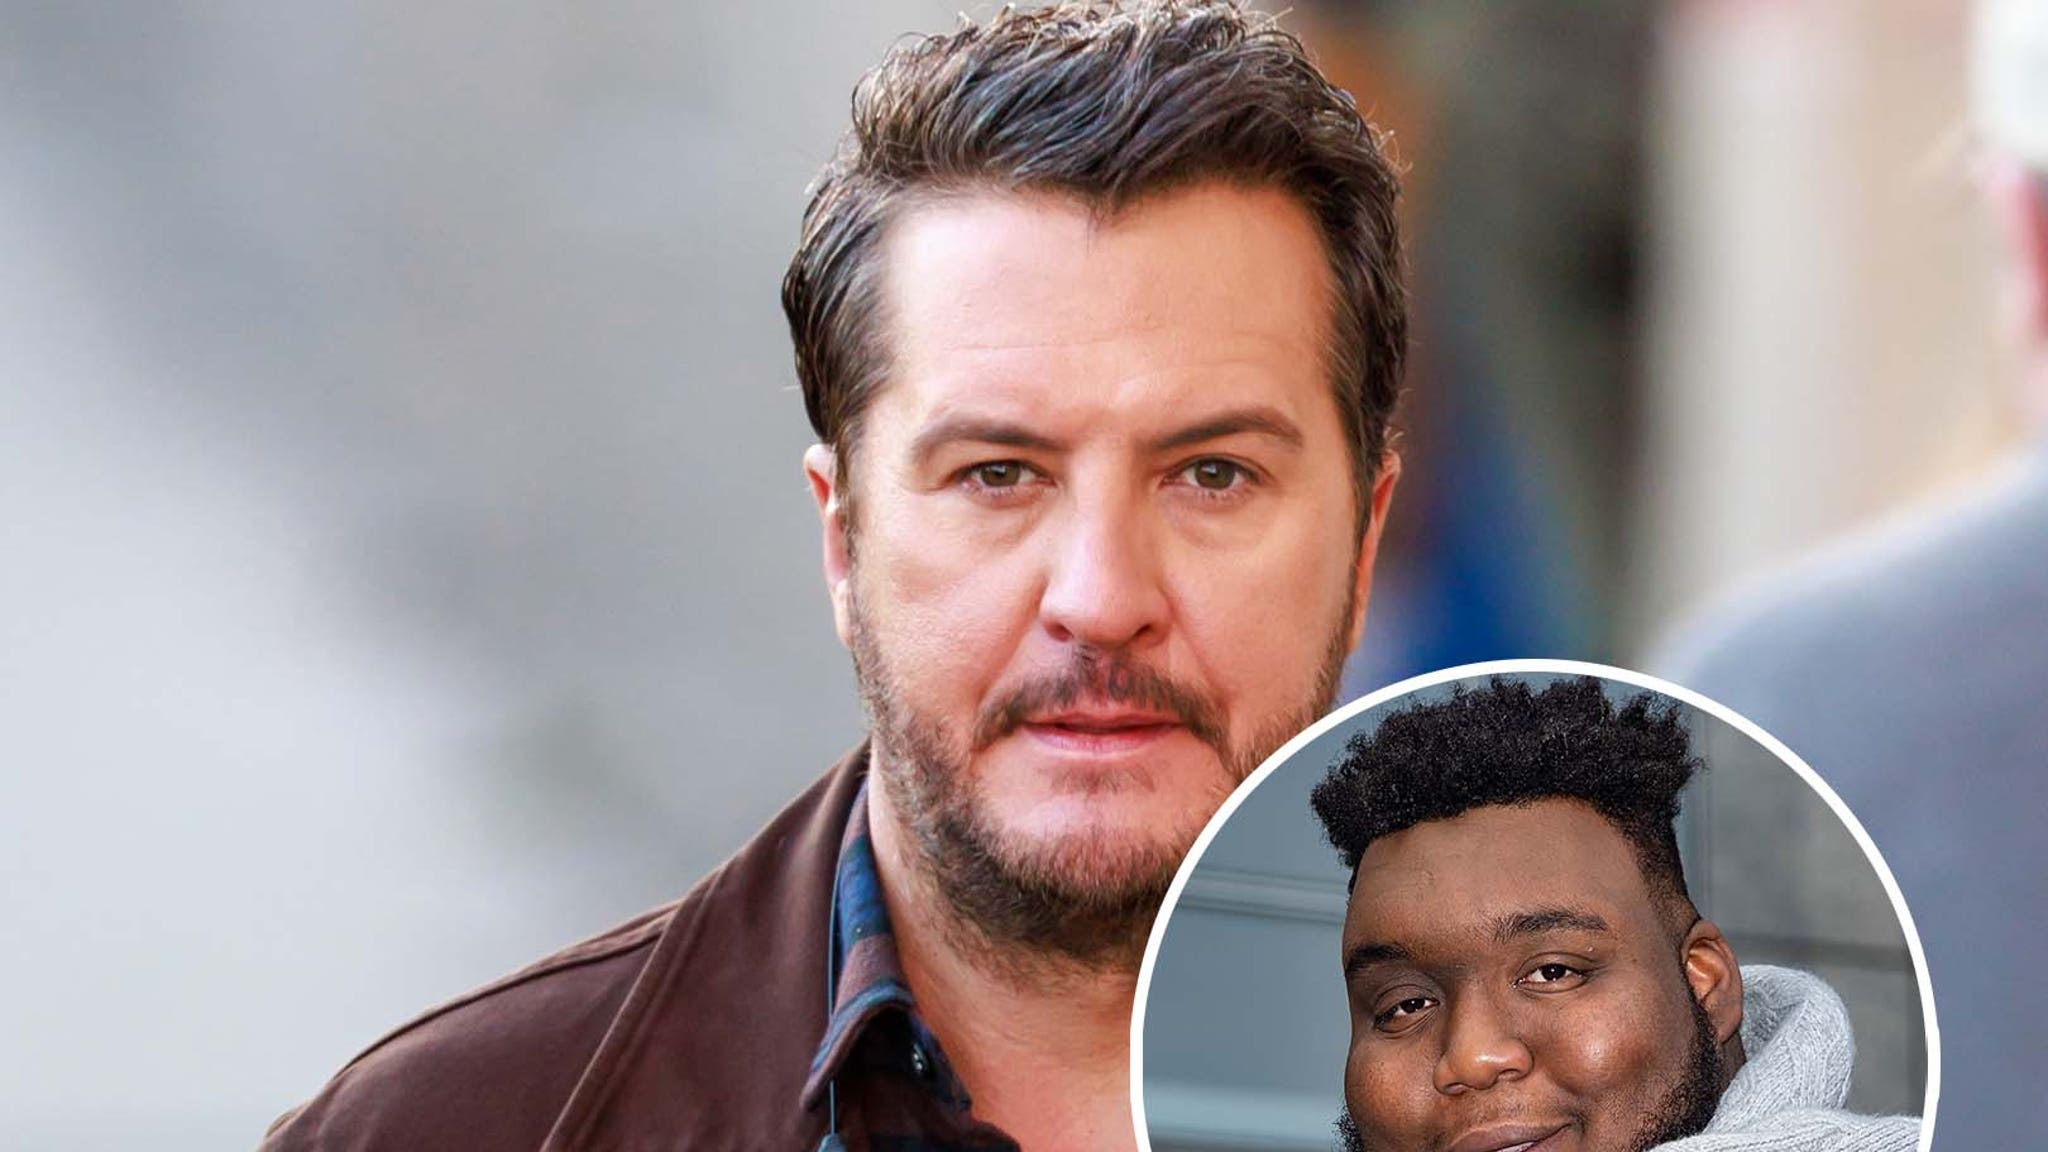 Luke Bryan Pays Tribute to Late American Idol Contestant Willie Spence